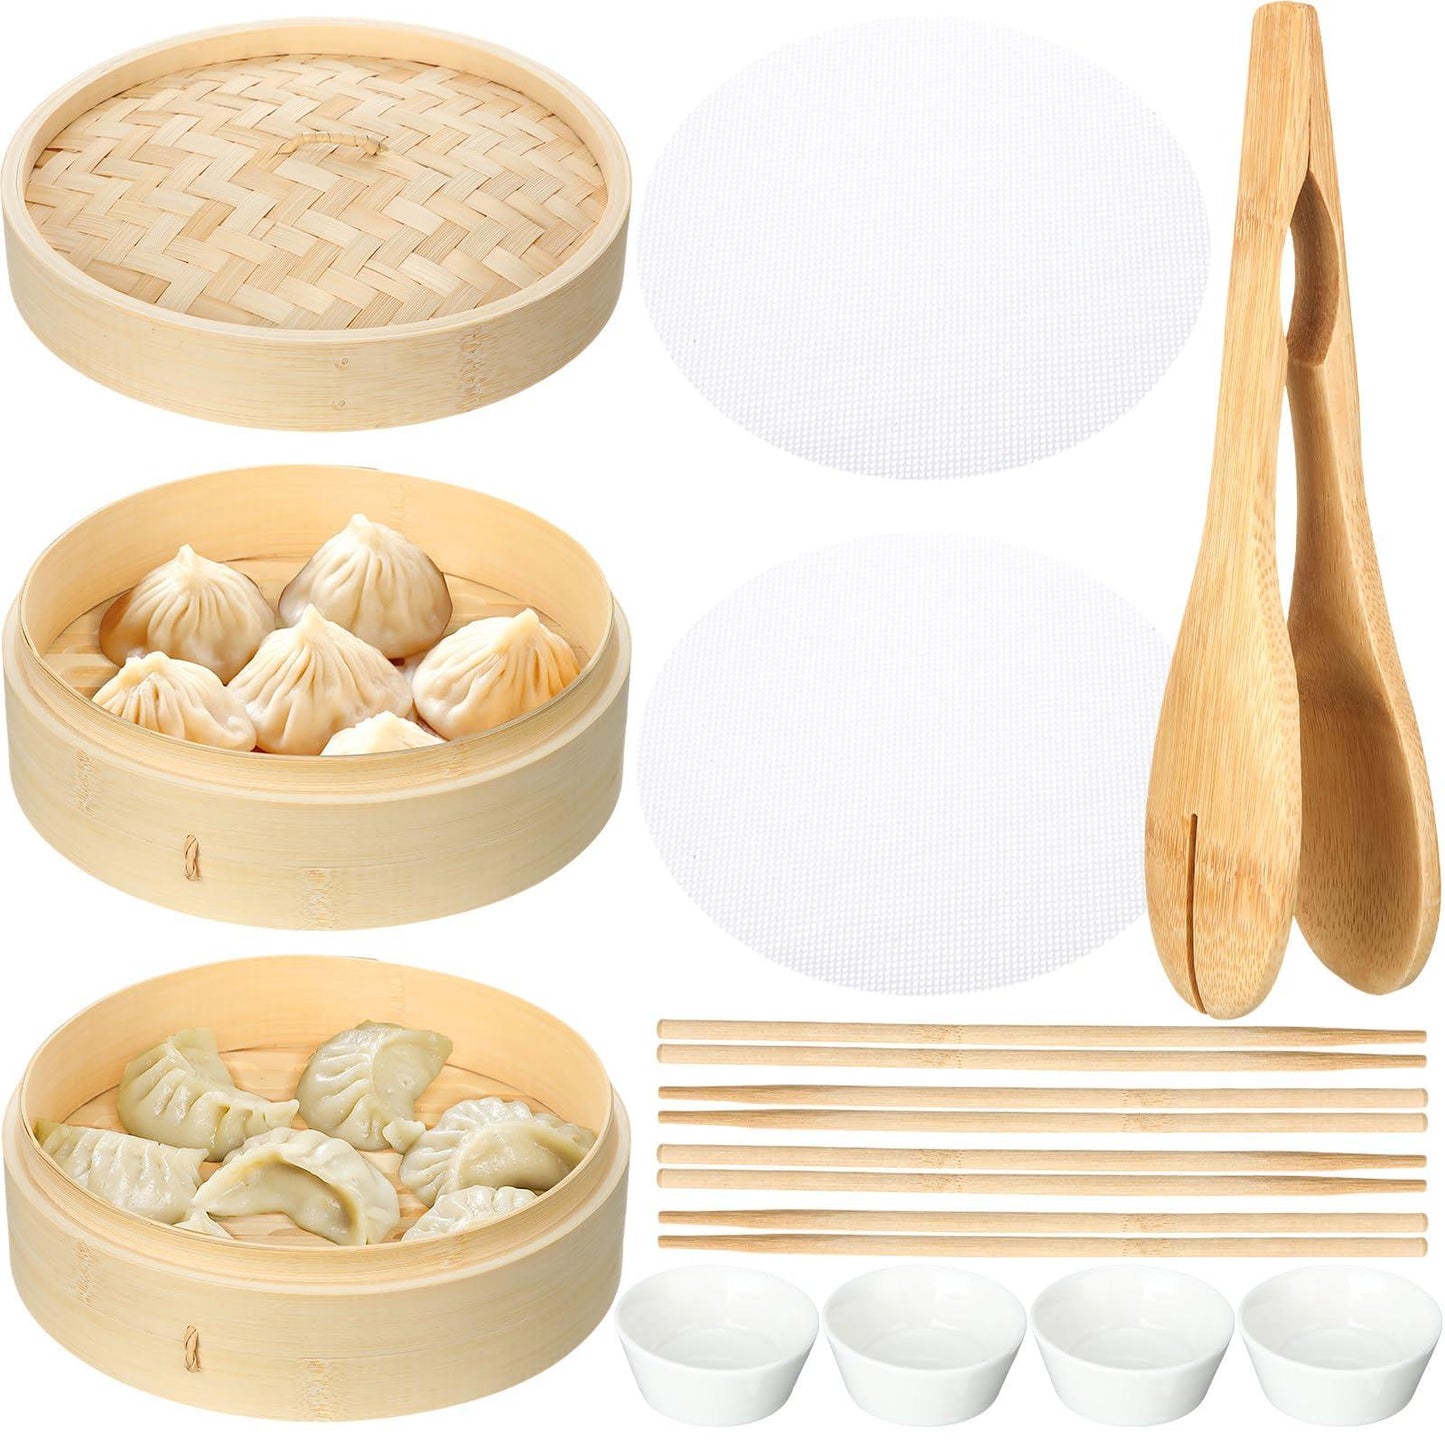 Domensi 12 Pcs Bamboo Steamer Basket Set, Includes 10 Inch 2 Tier Bamboo Steamer for Cooking, 4 Pairs Chopsticks, 4 Sauce Dish, 2 Silicone Liners, 1 Bamboo Tongs for Dim Sum Dumplings Fish Rice Foods - CookCave